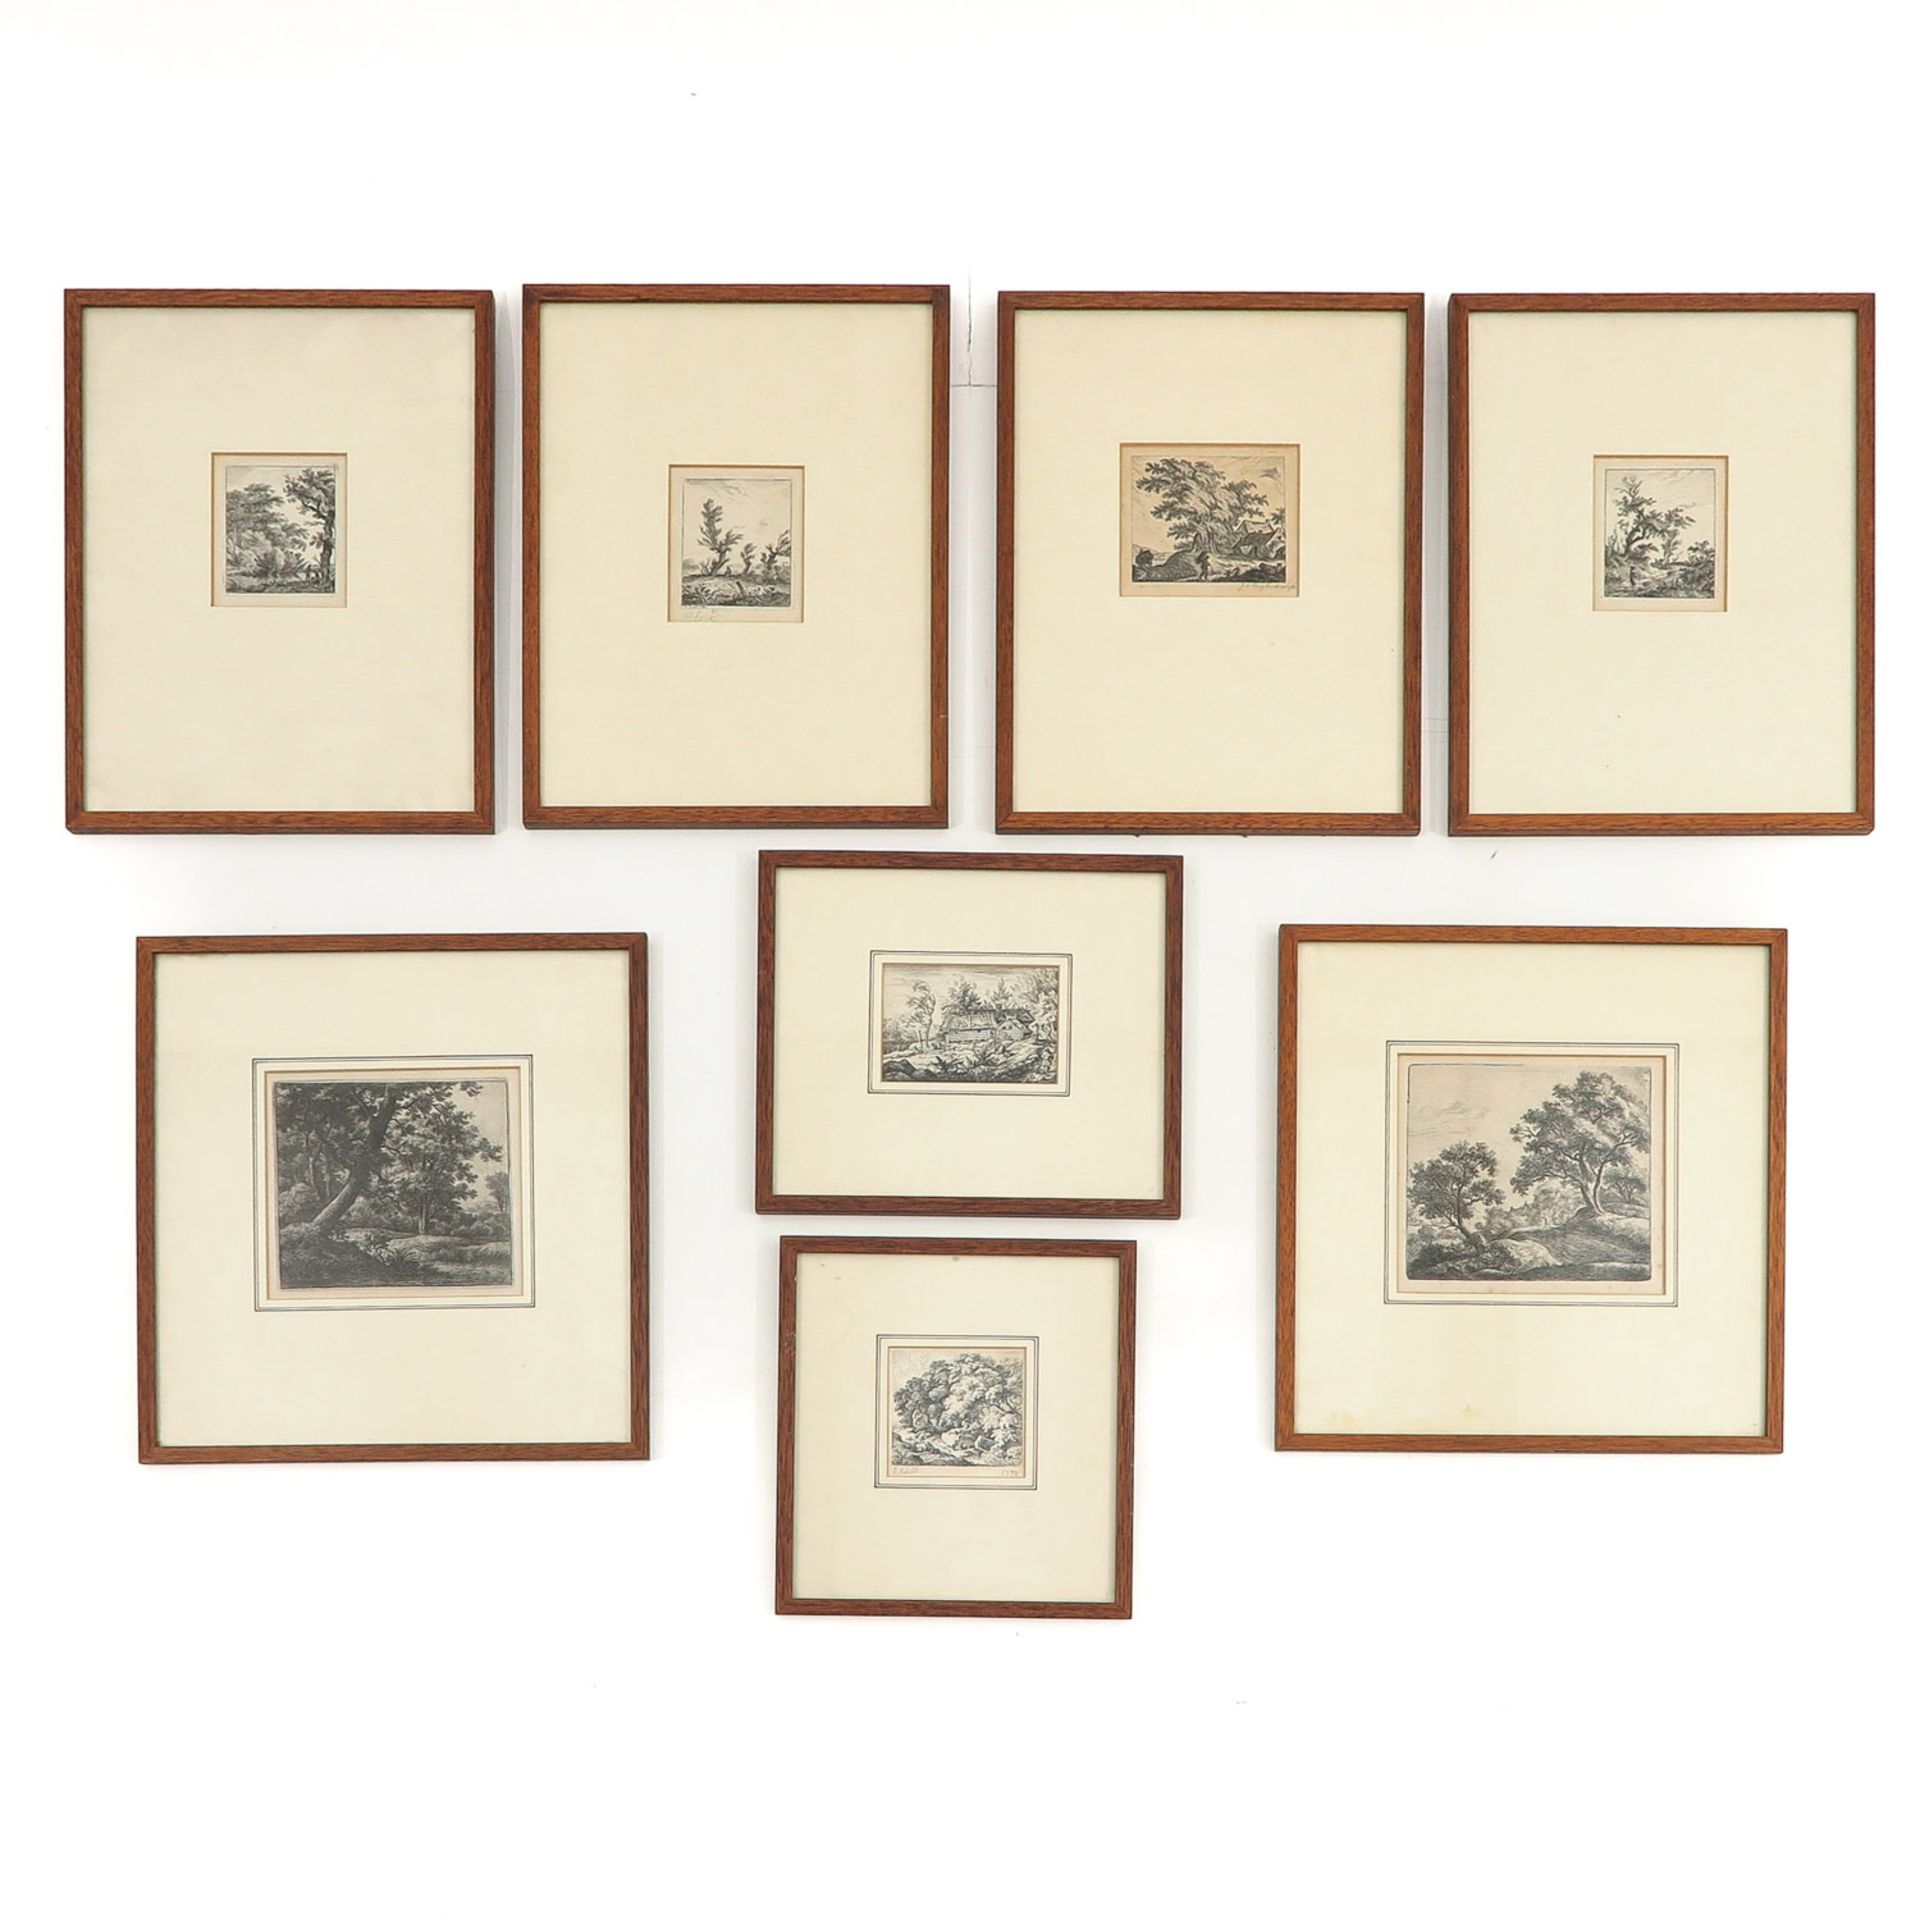 A Collection of 8 Etchings